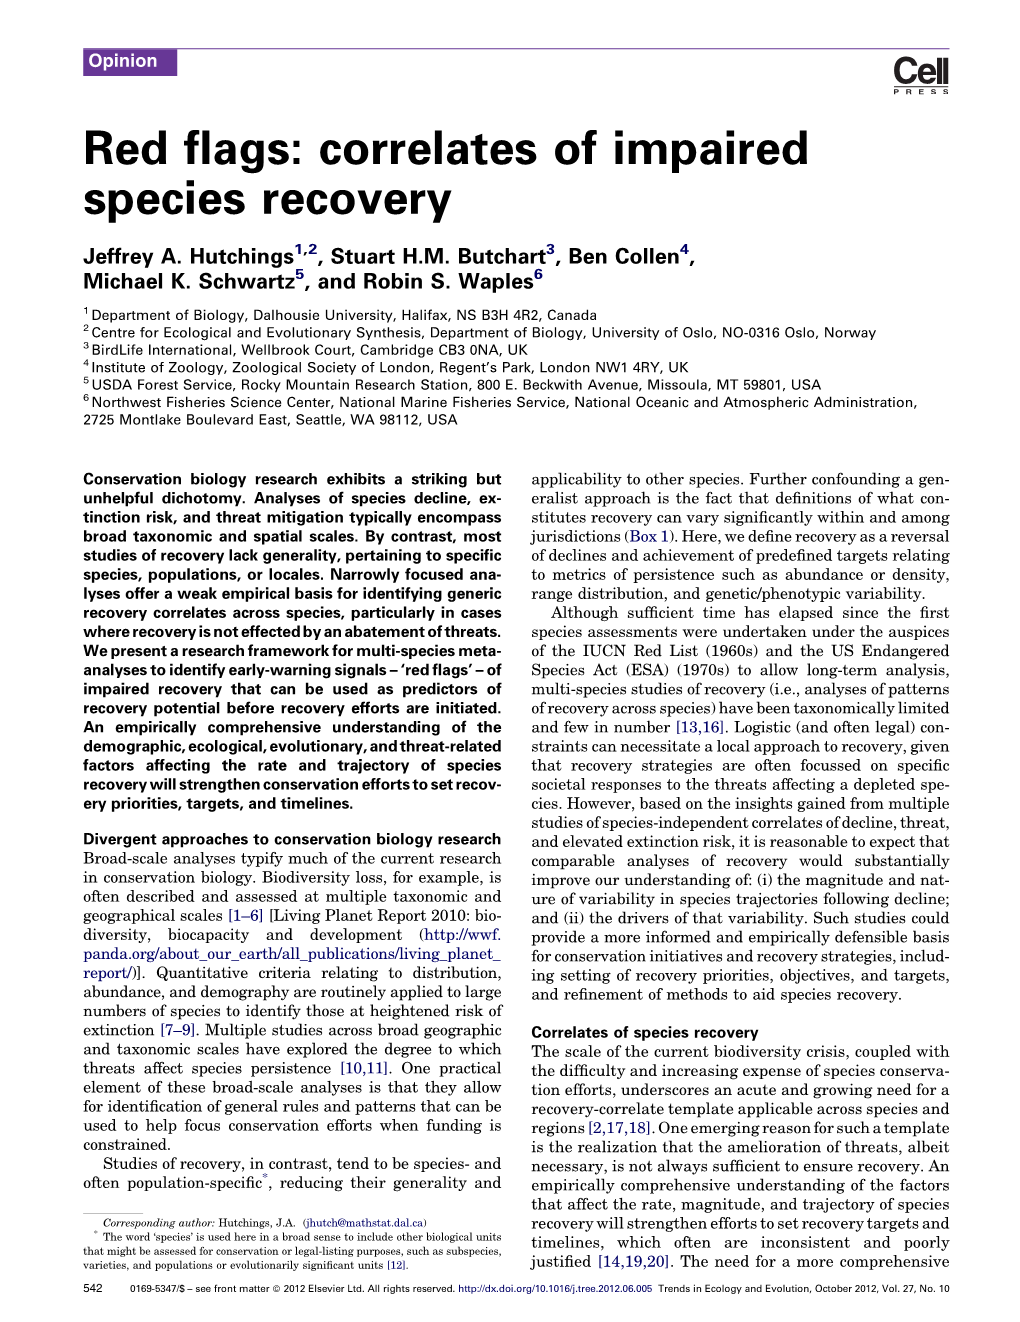 Correlates of Impaired Species Recovery